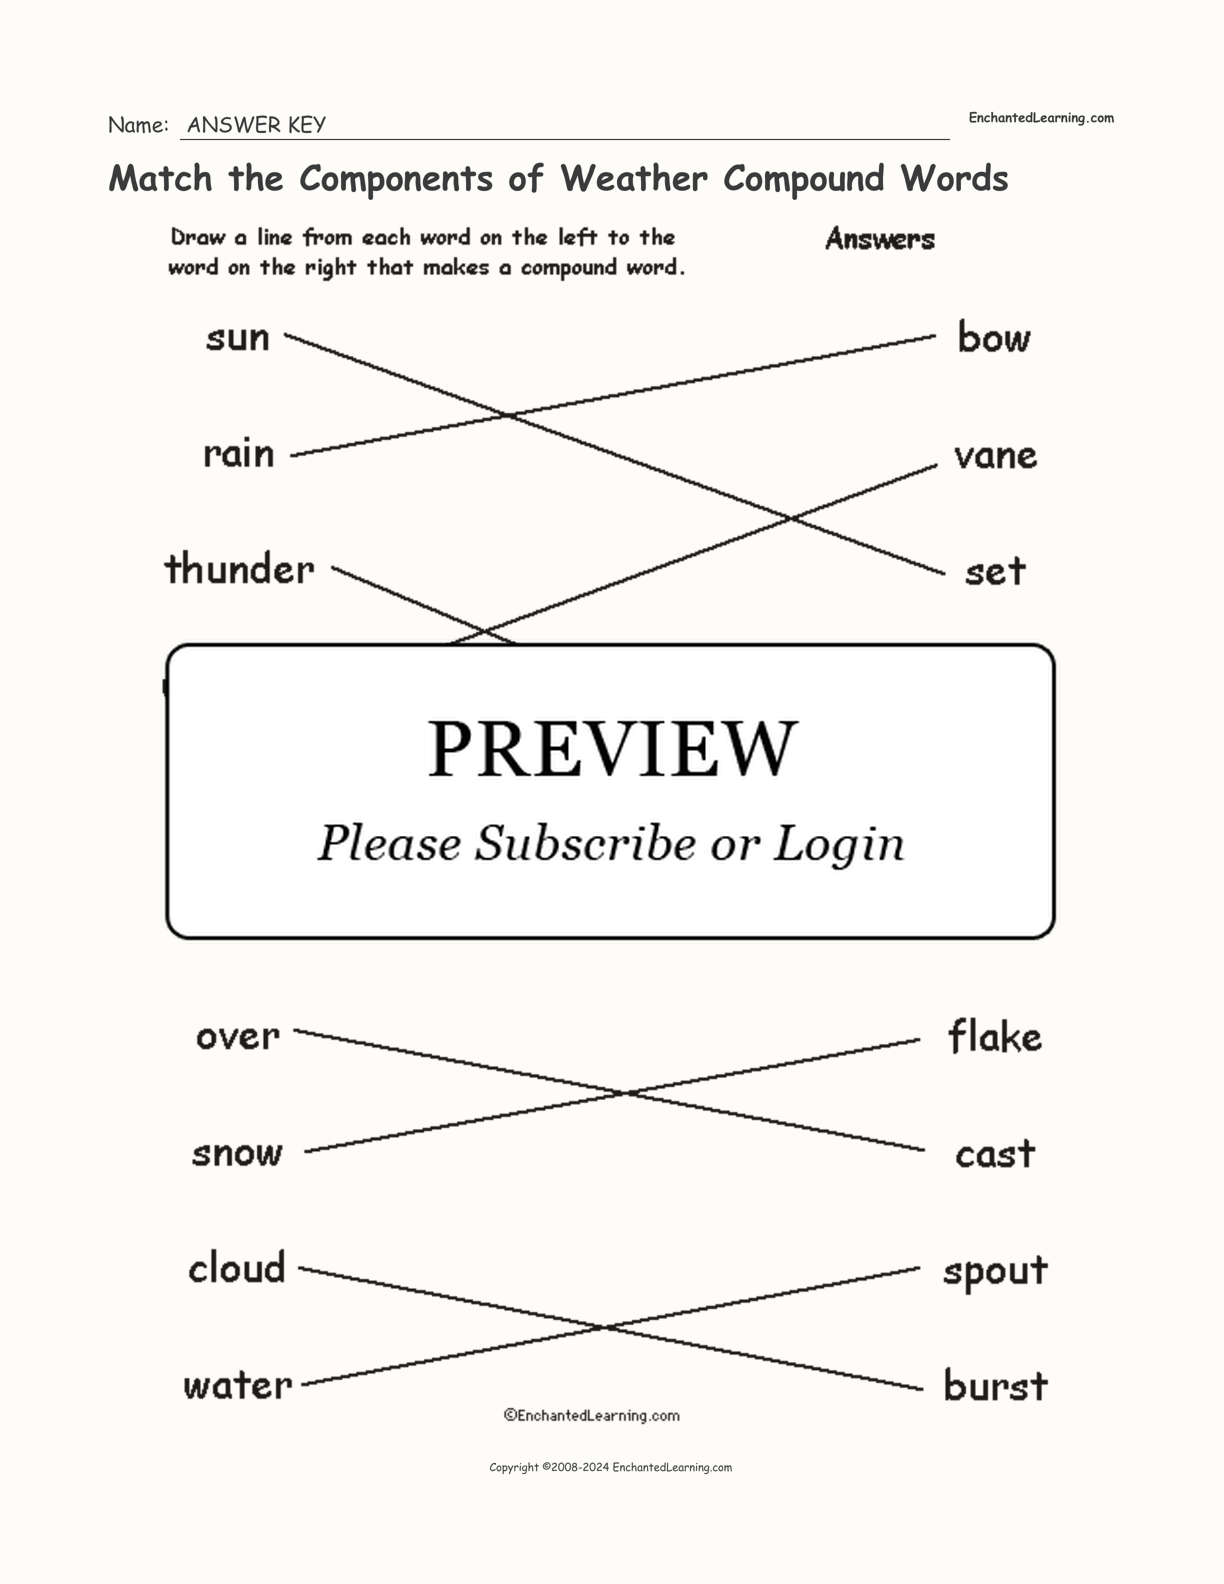 Match the Components of Weather Compound Words interactive worksheet page 2